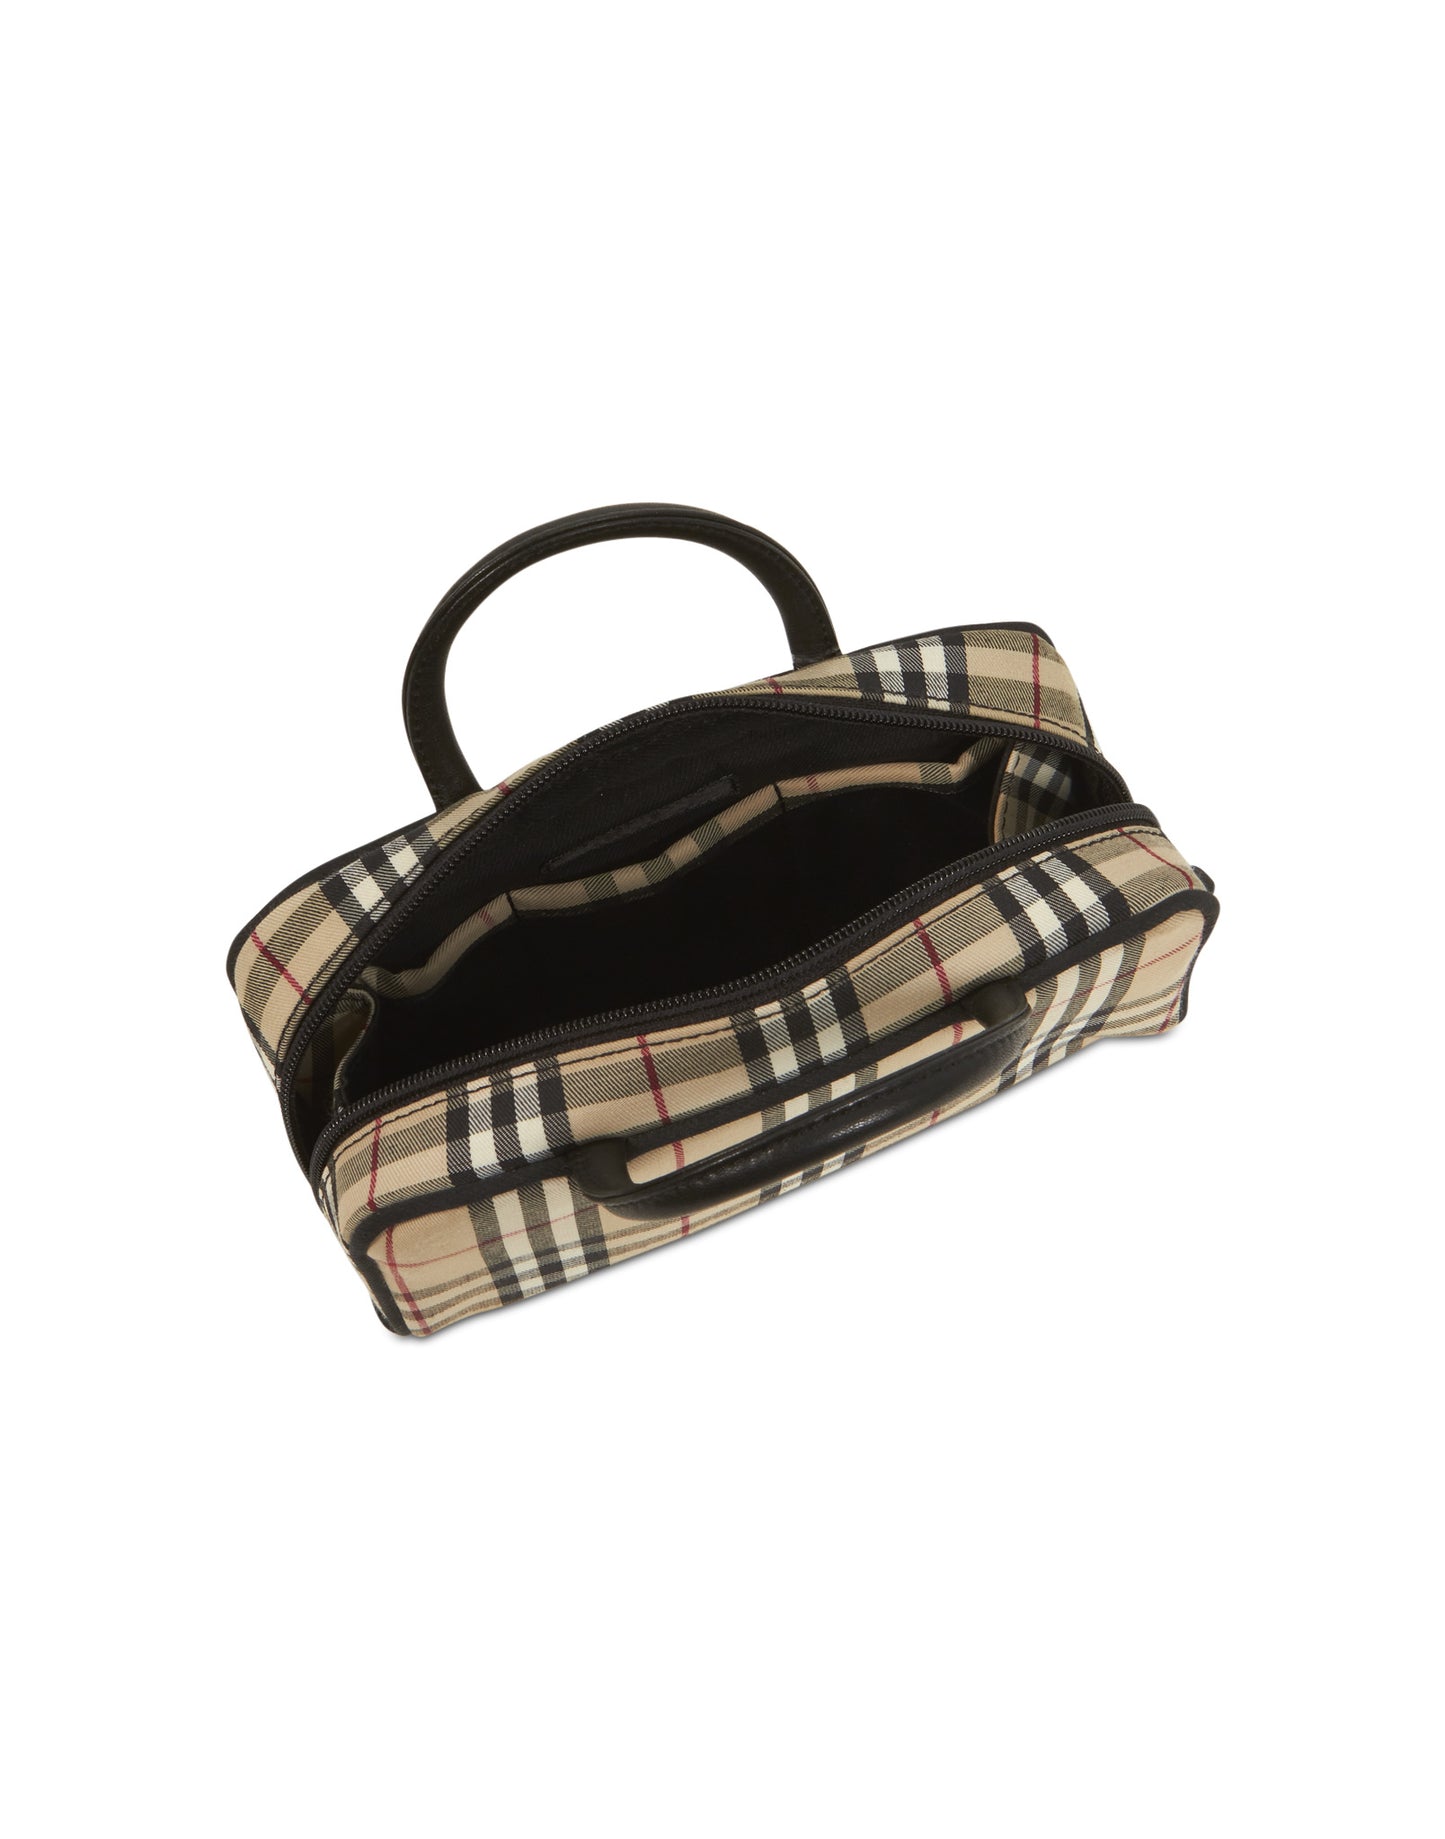 Burberry Beige Nova Check Cosmetic Case with Handles